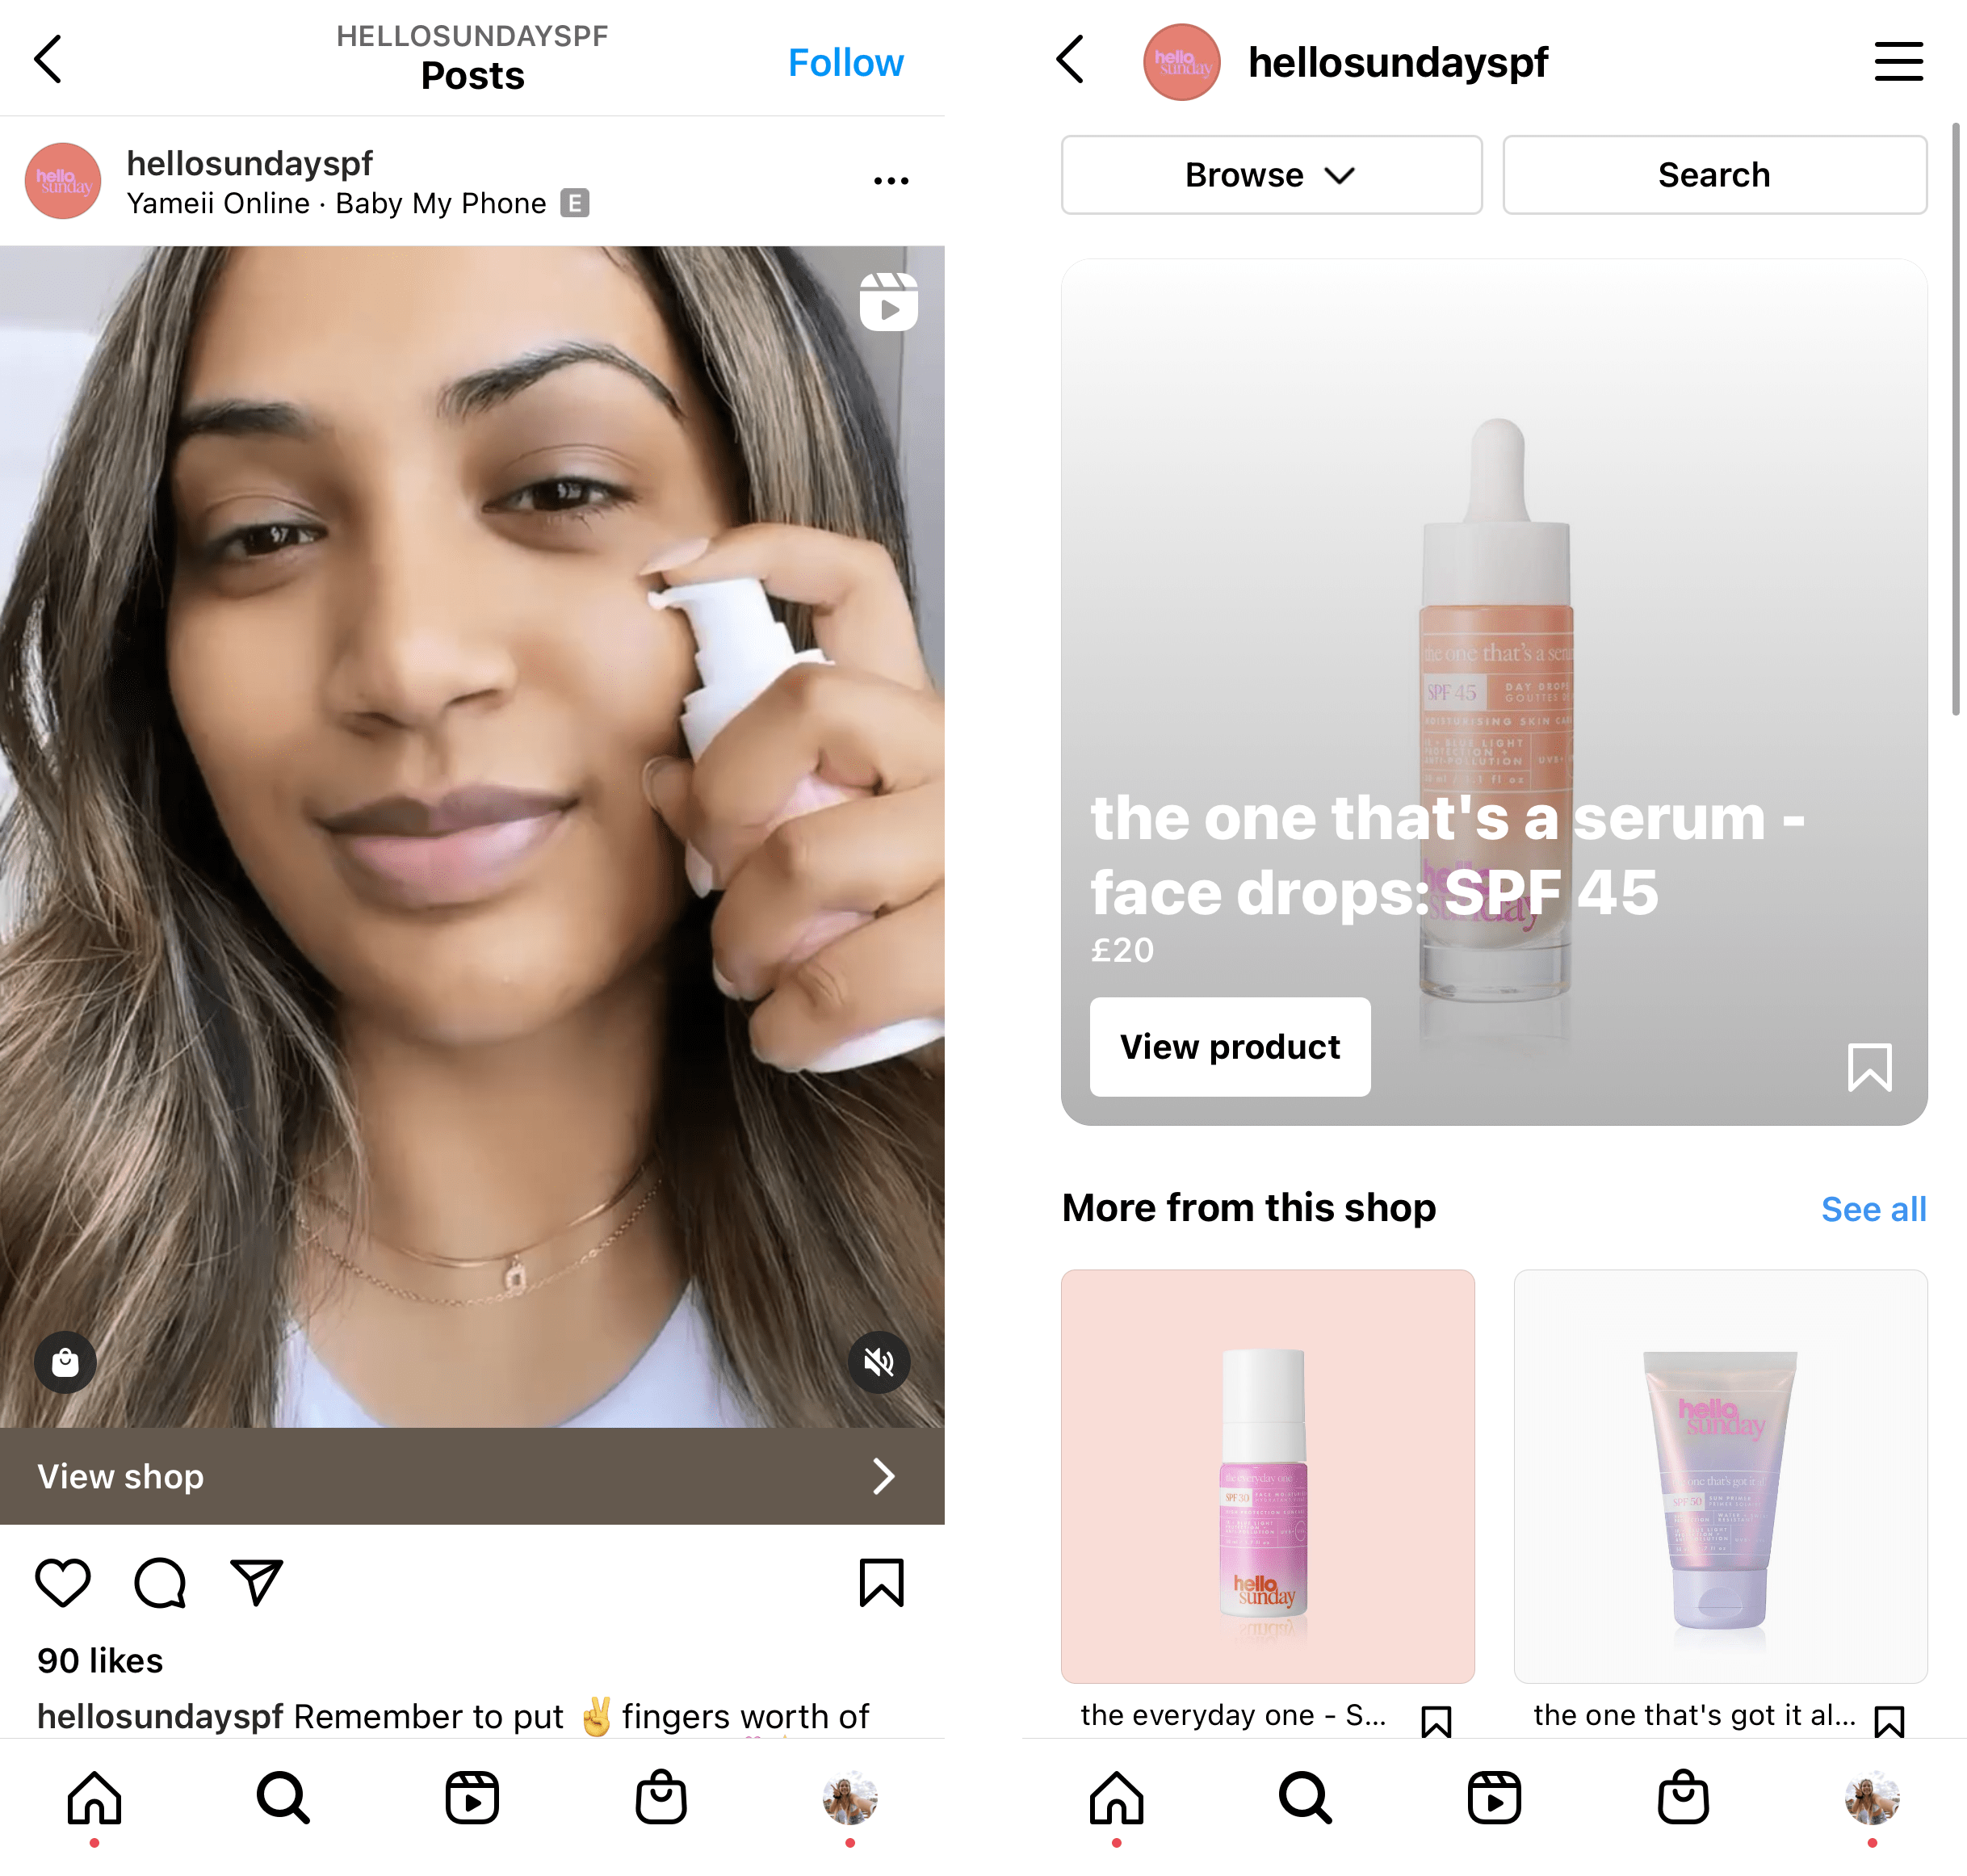 Micro Influencers–These screenshots show Davina’s Instagram reel featured on Hello Sunday SPF’s Instagram page, as well as their Instagram shop featuring a variety of their products.